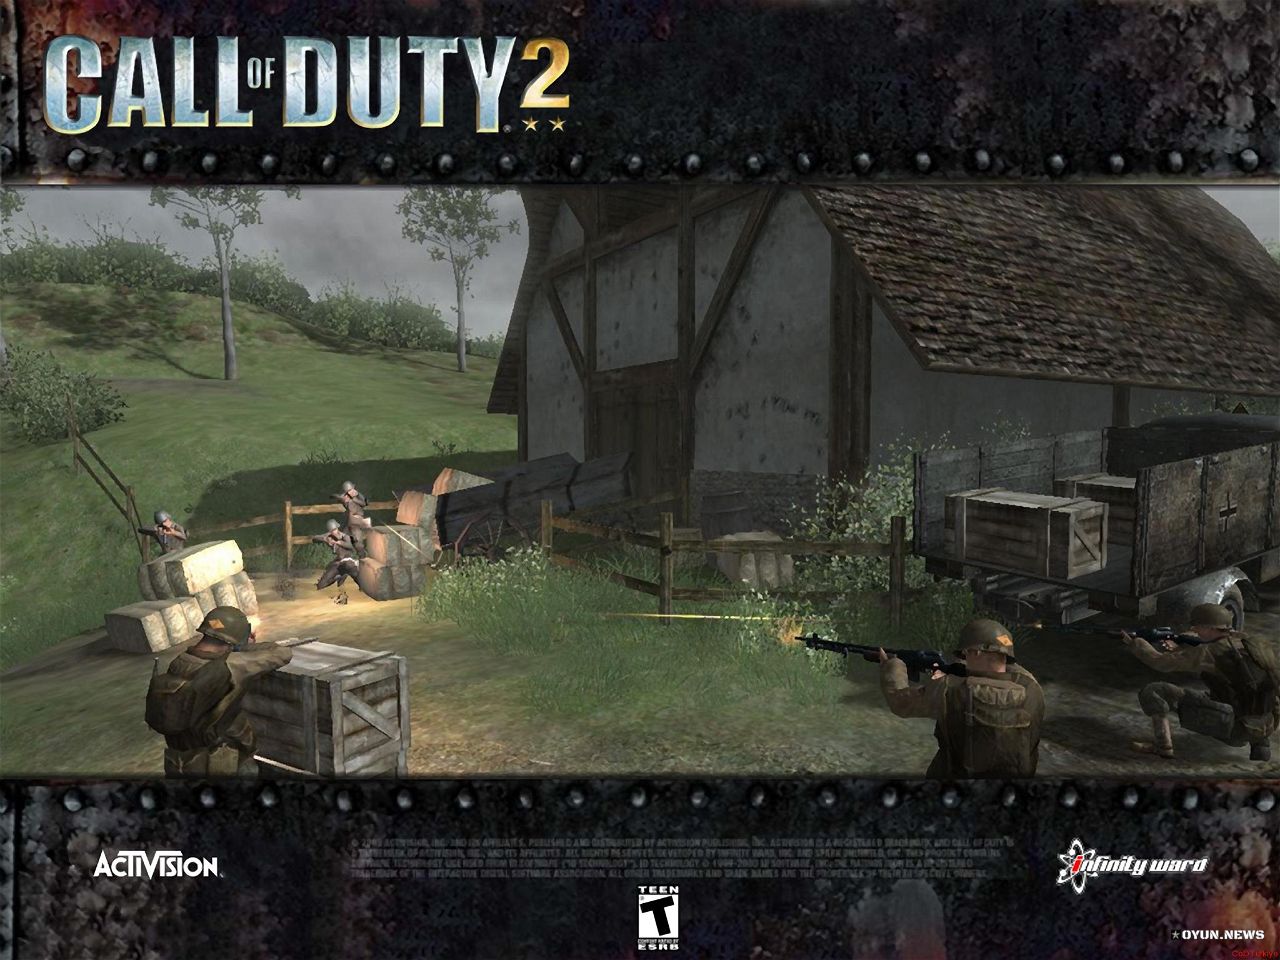 Call Of Duty 2 Wallpaper In Special Frame 17 2048x1536